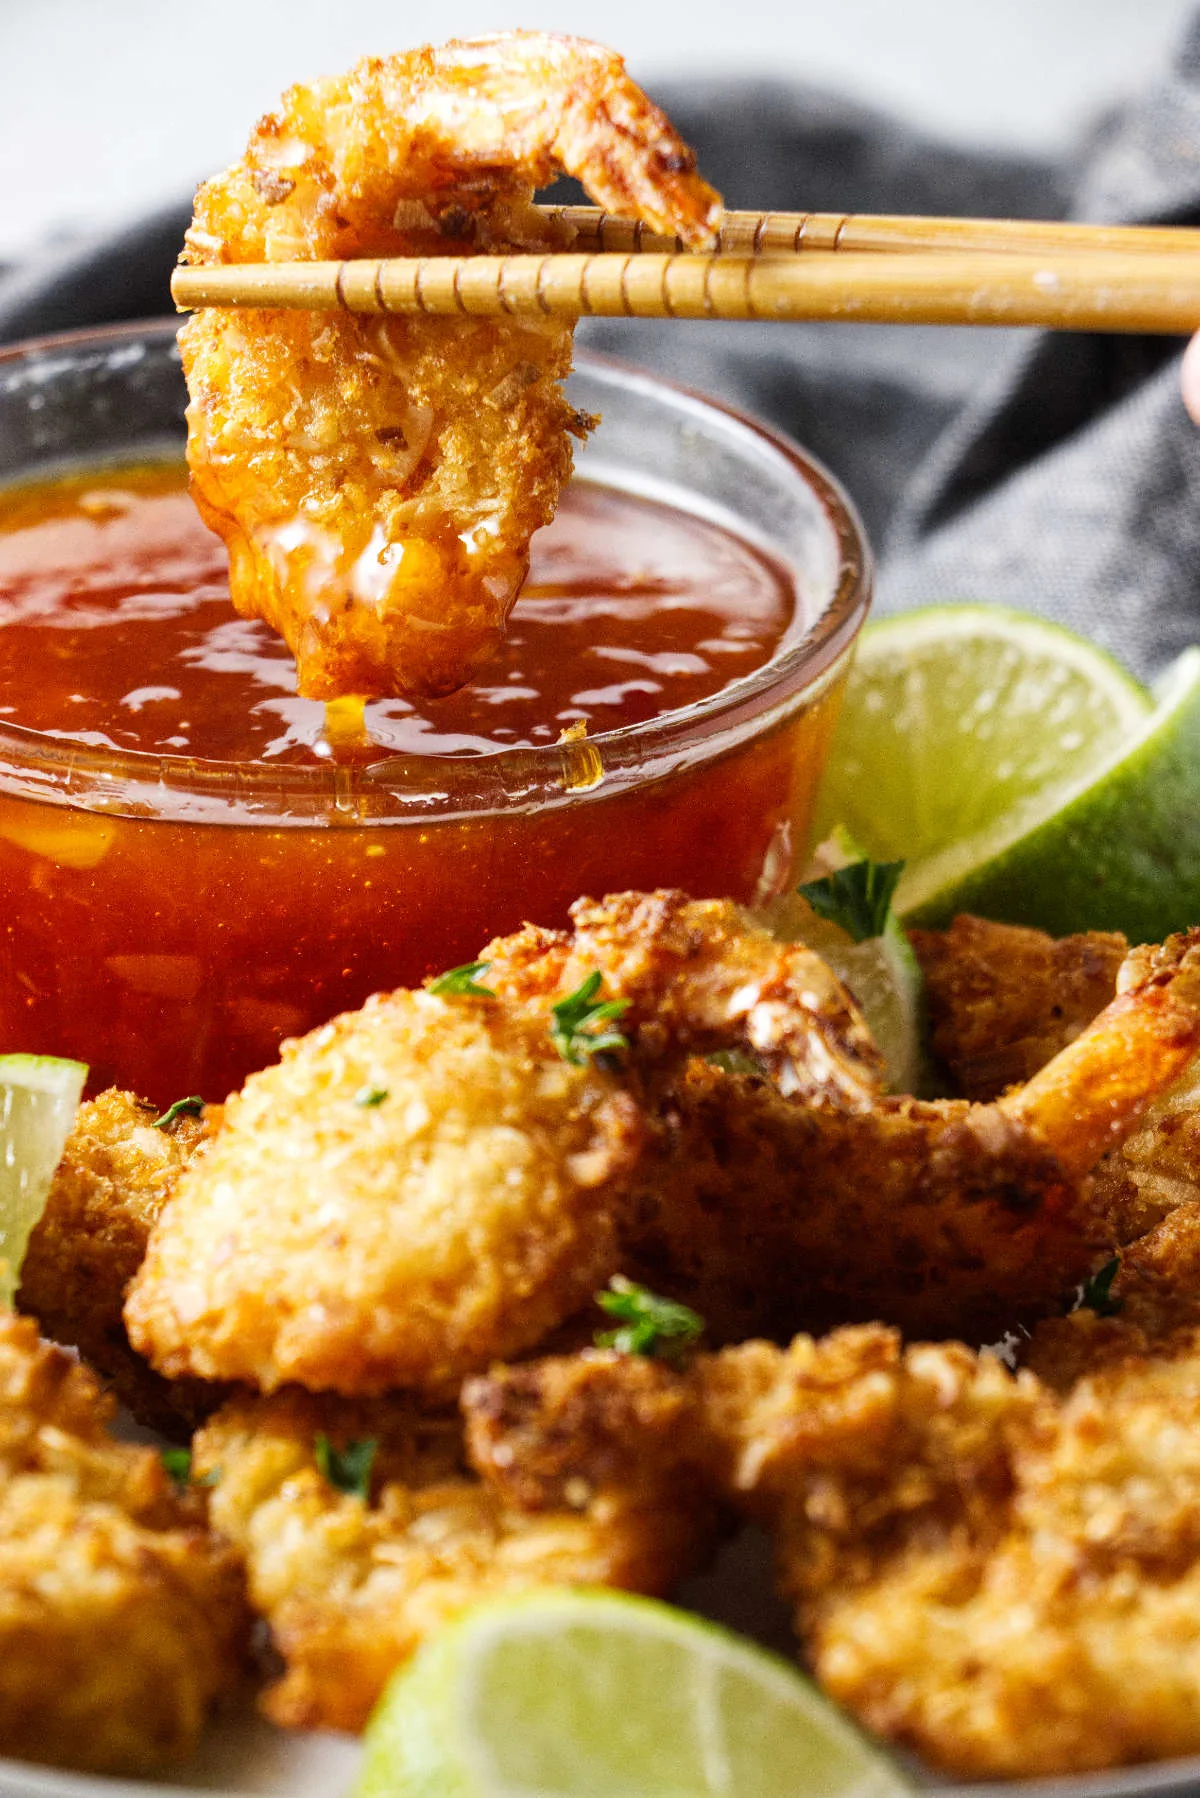 Dipping a shrimp in sweet chili sauce.